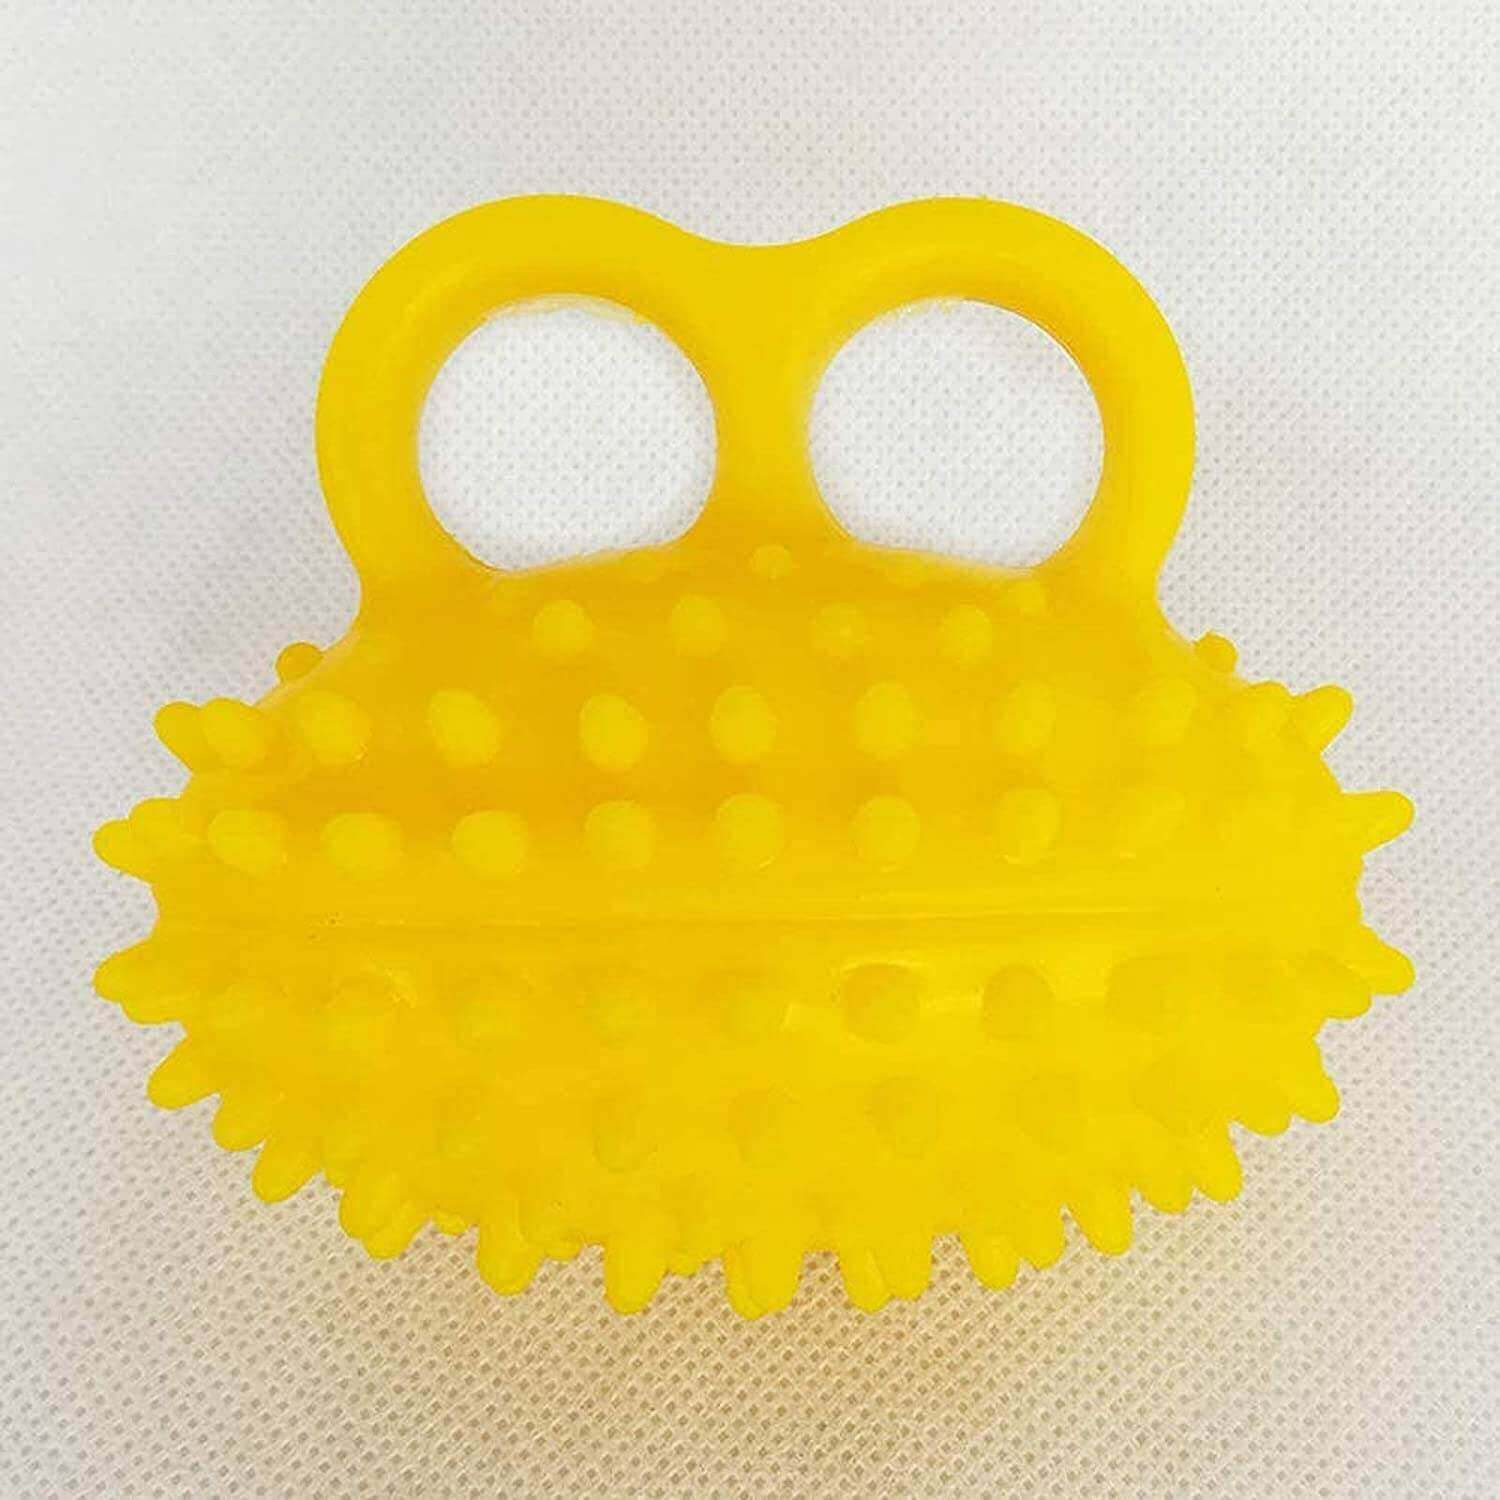 Spiky massage ball for hand and finger exercises, item on a cloth